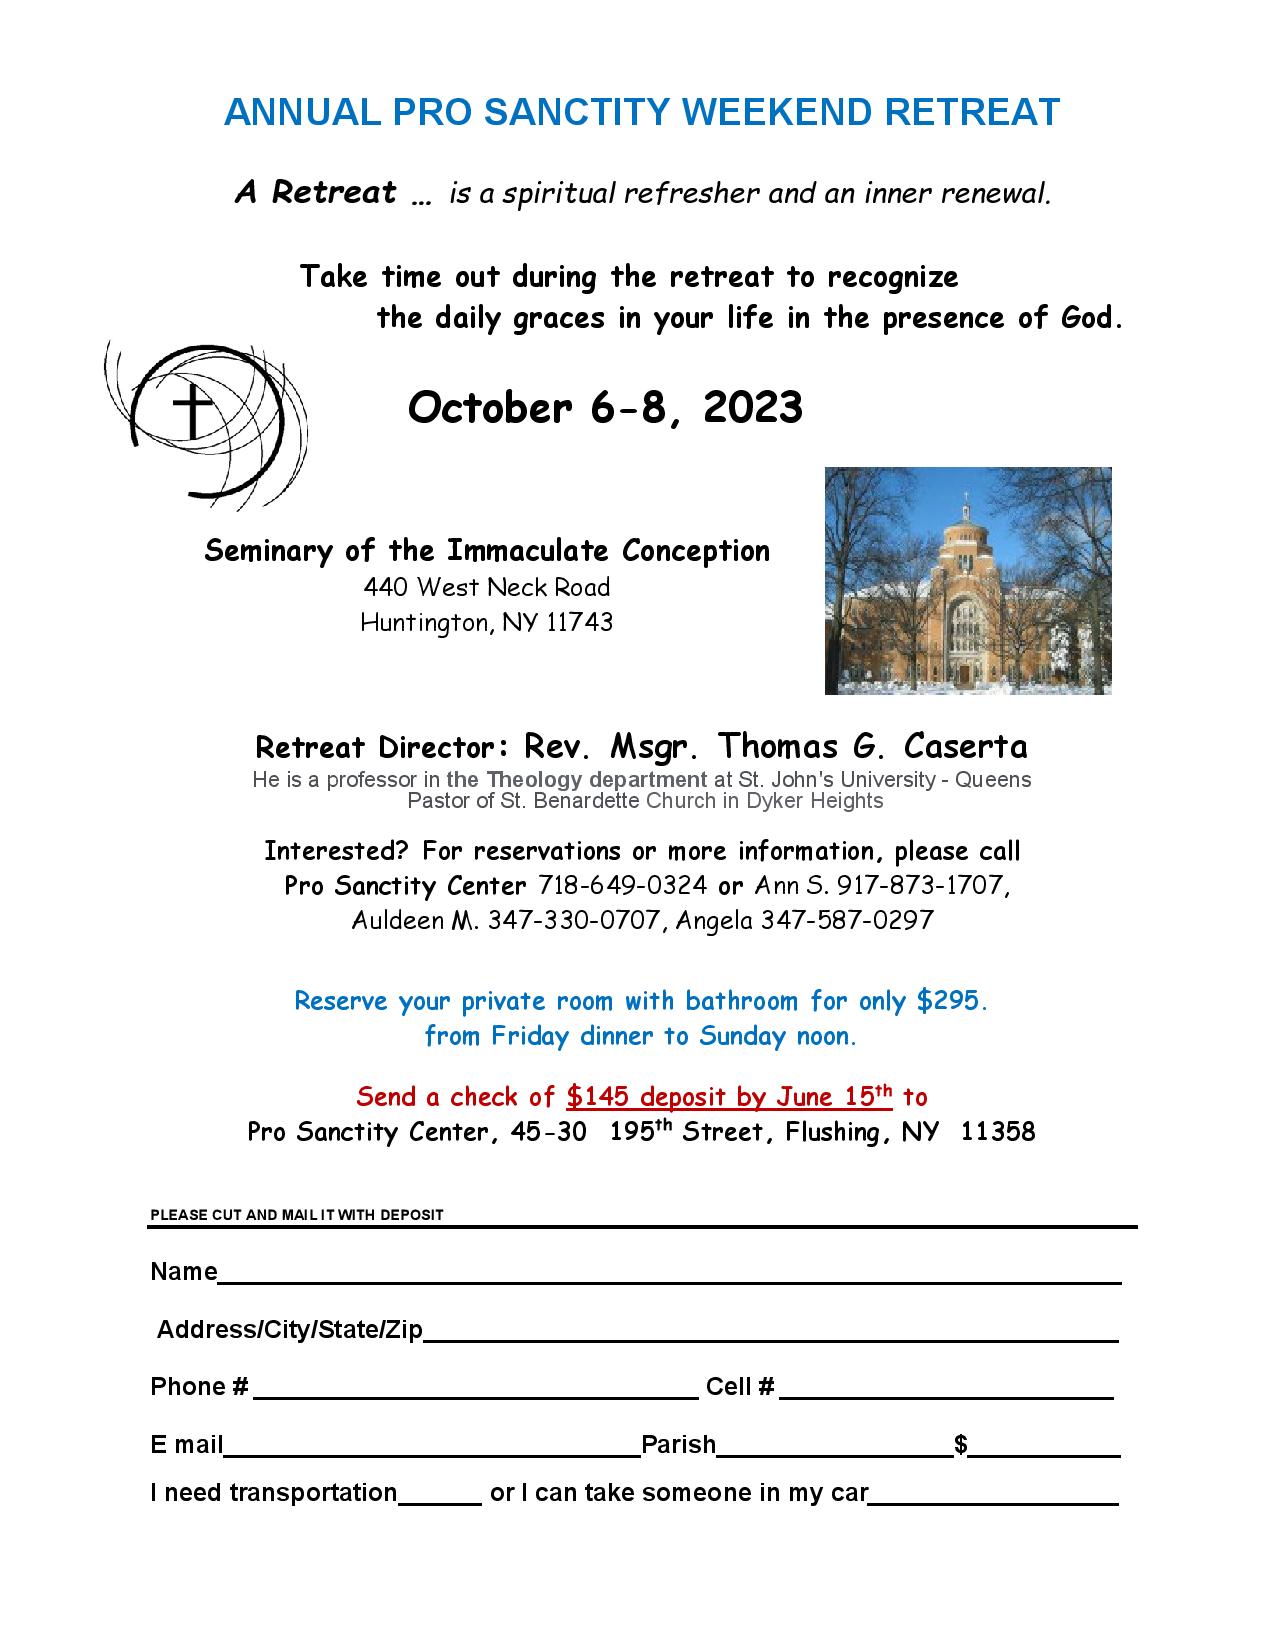 Annual Pro Sanctity Weekend RetreatOct 6 to 8 2023